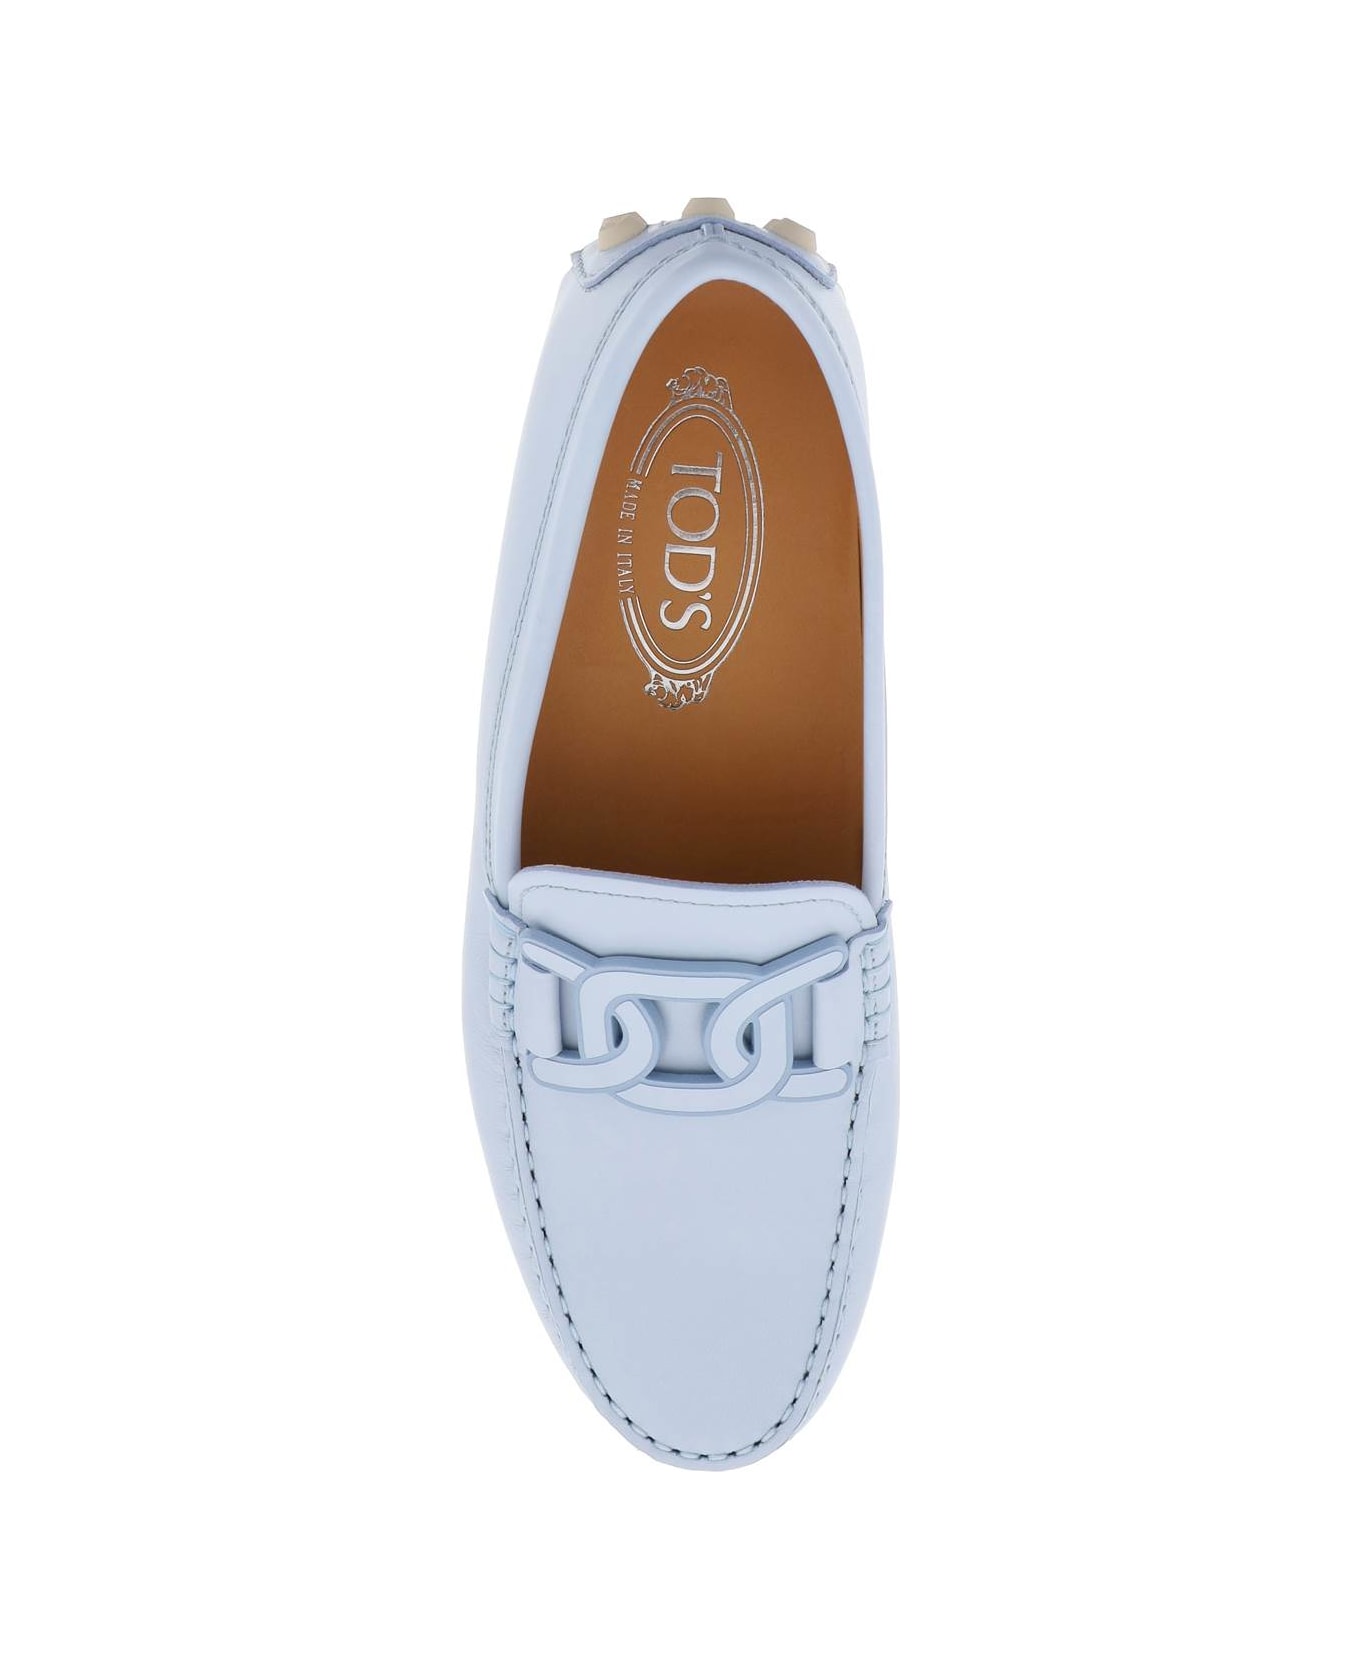 Tod's Gommino Bubble Loafers - AIR (Light blue)